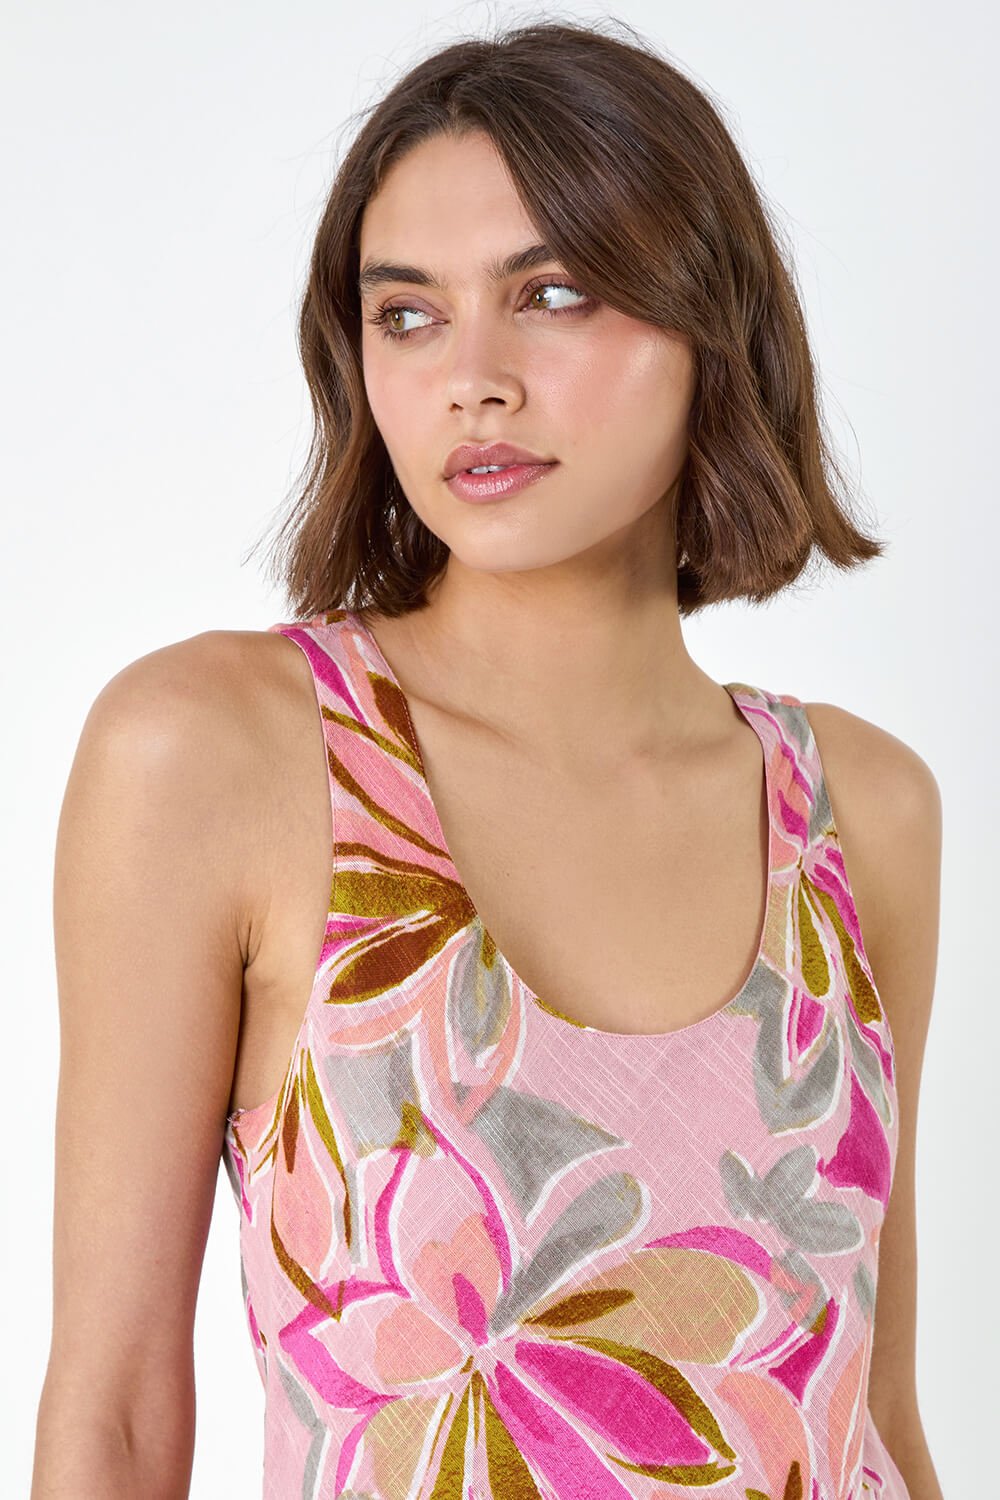 PINK Floral Print Cotton Layered Dress, Image 4 of 5